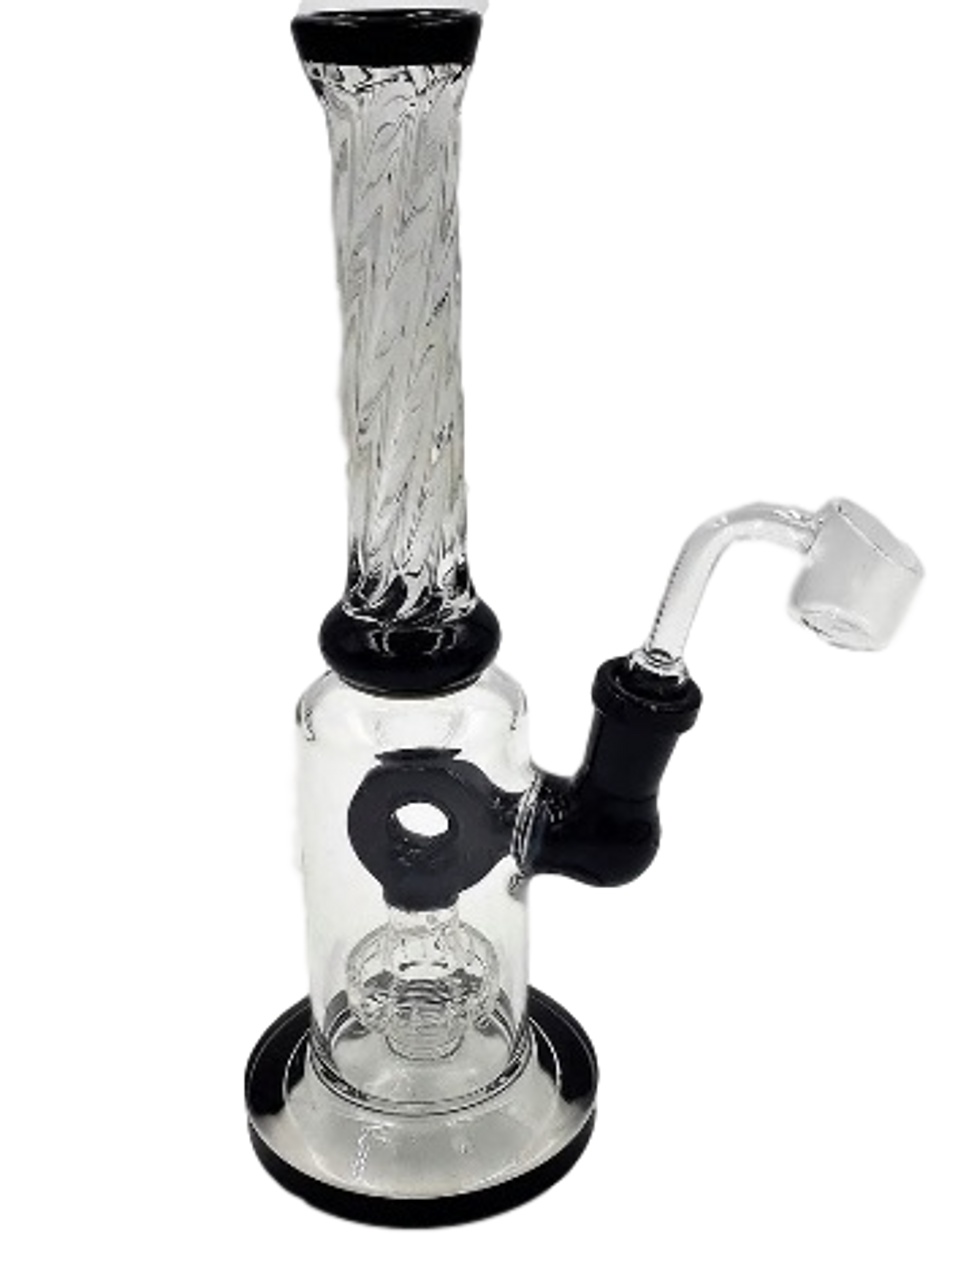 10" Donut/Showerhead Perc Swizel Neck Water Pipe/Bong - Assorted Colors - With 14mm Male Quartz Banger and Flower Bowl